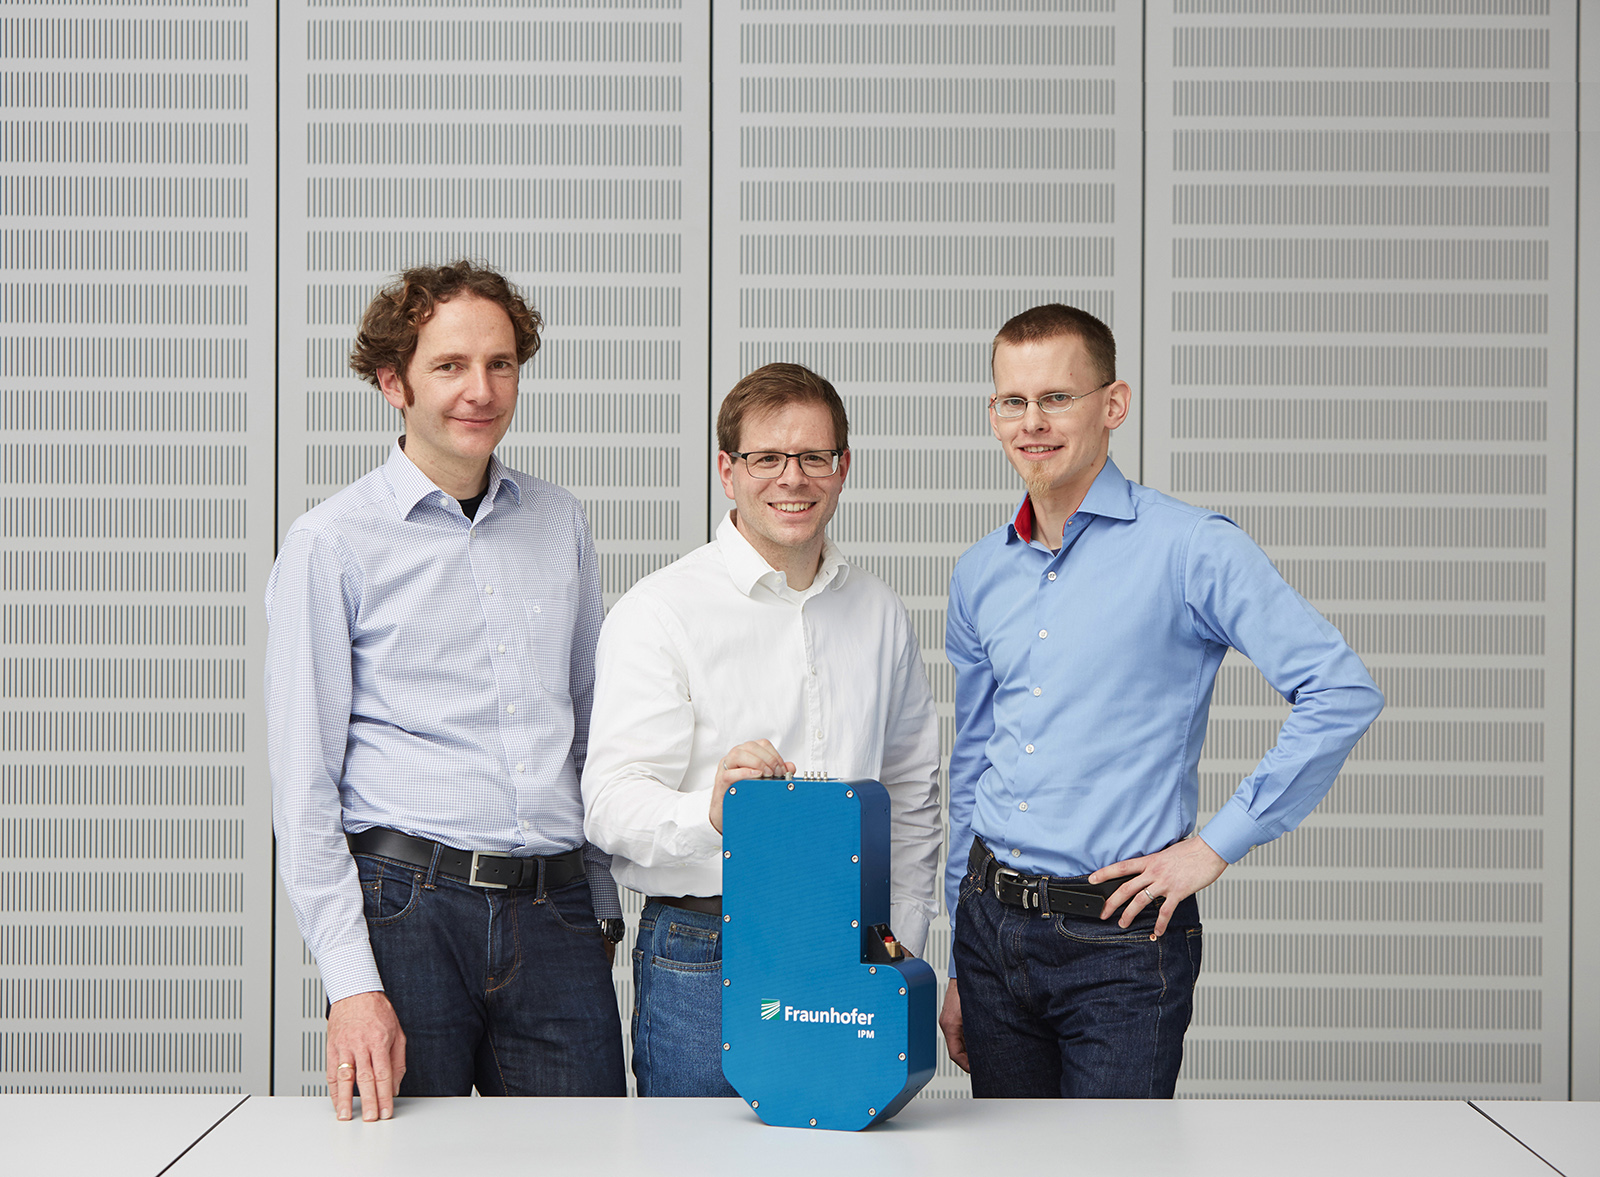 With the development of their holographic measurement technology Markus Fratz, Alexander Bertz and Tobias Beckmann (from the left) made it possible to fully inspect all parts in the production cycle in a matter of seconds.